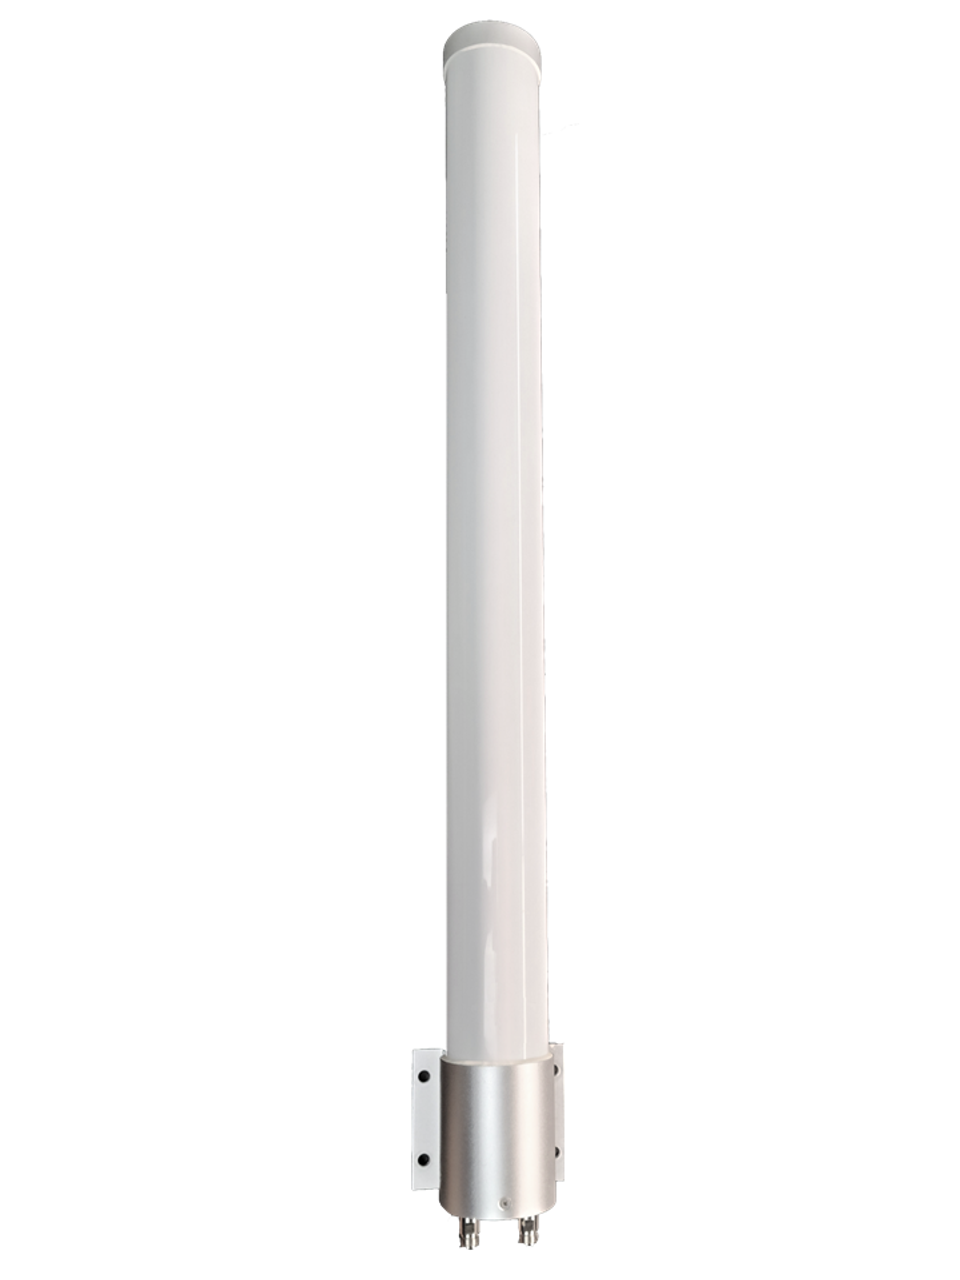 M39 Omni Directional MIMO 2 x Cellular 4G 5G LTE Antenna for Inseego Wavemaker 5G Router FX2000 w/Bracket Mount - 2 x N Female w/Cable Length Options.